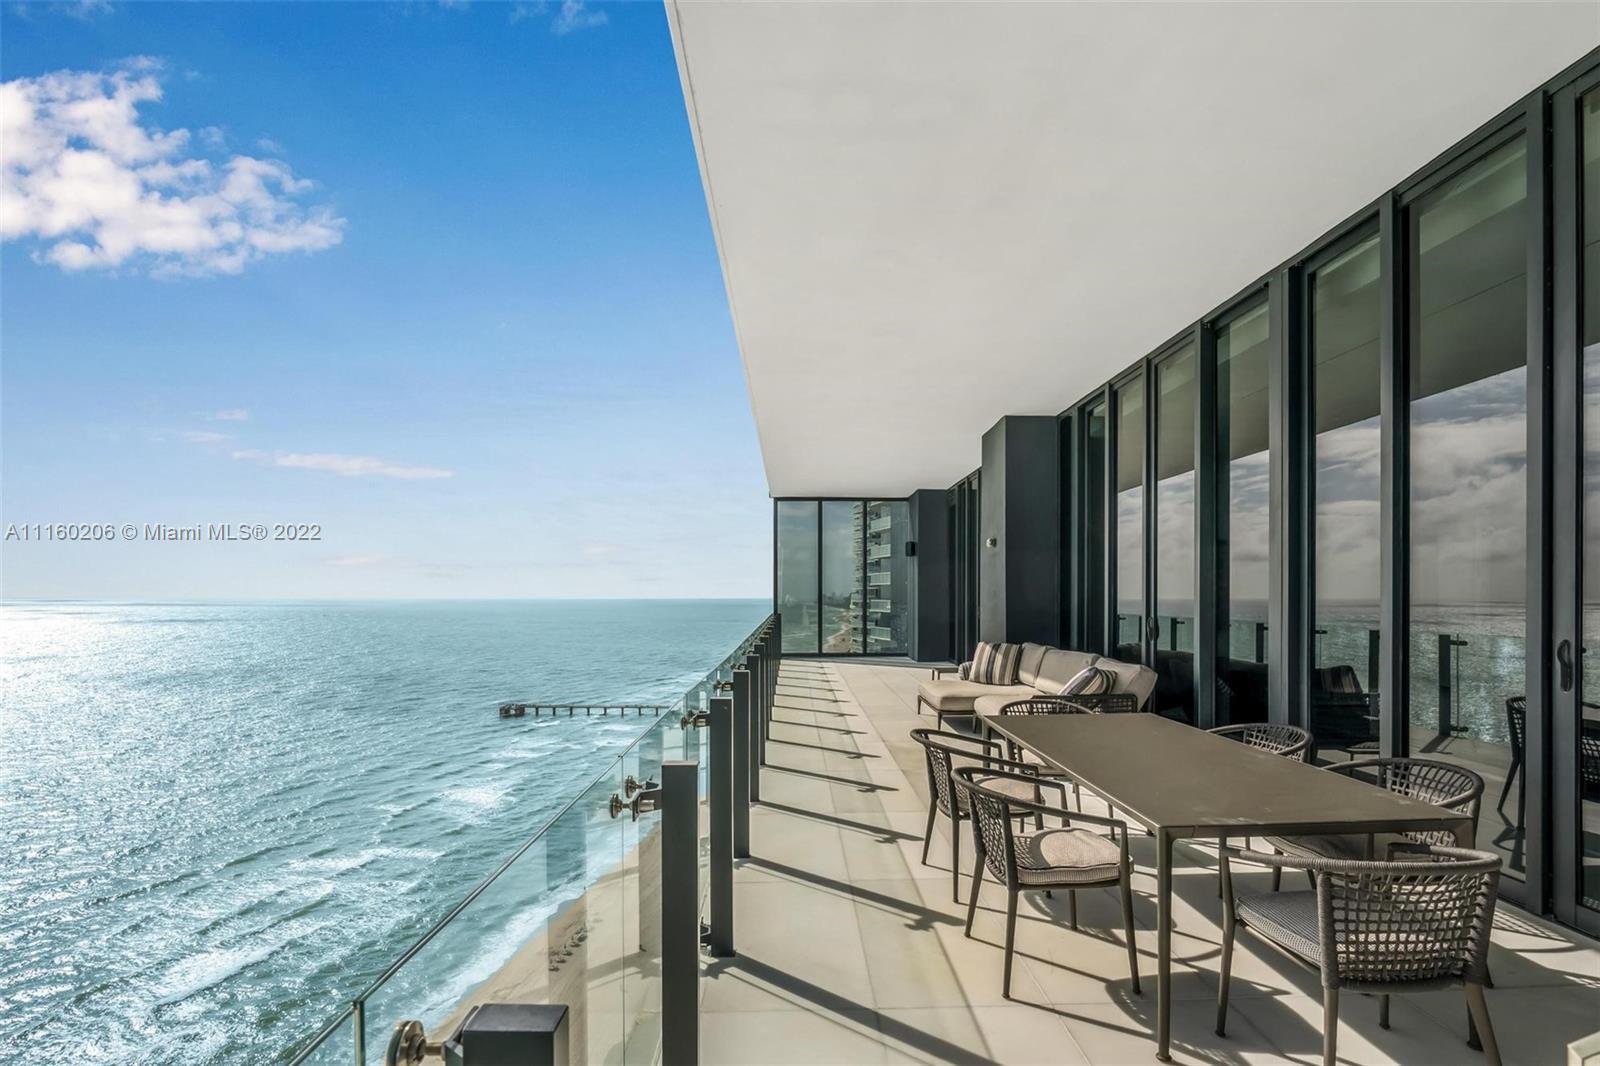 If you are looking for an ocean-front home with unparalleled views which offers smart-technology, el